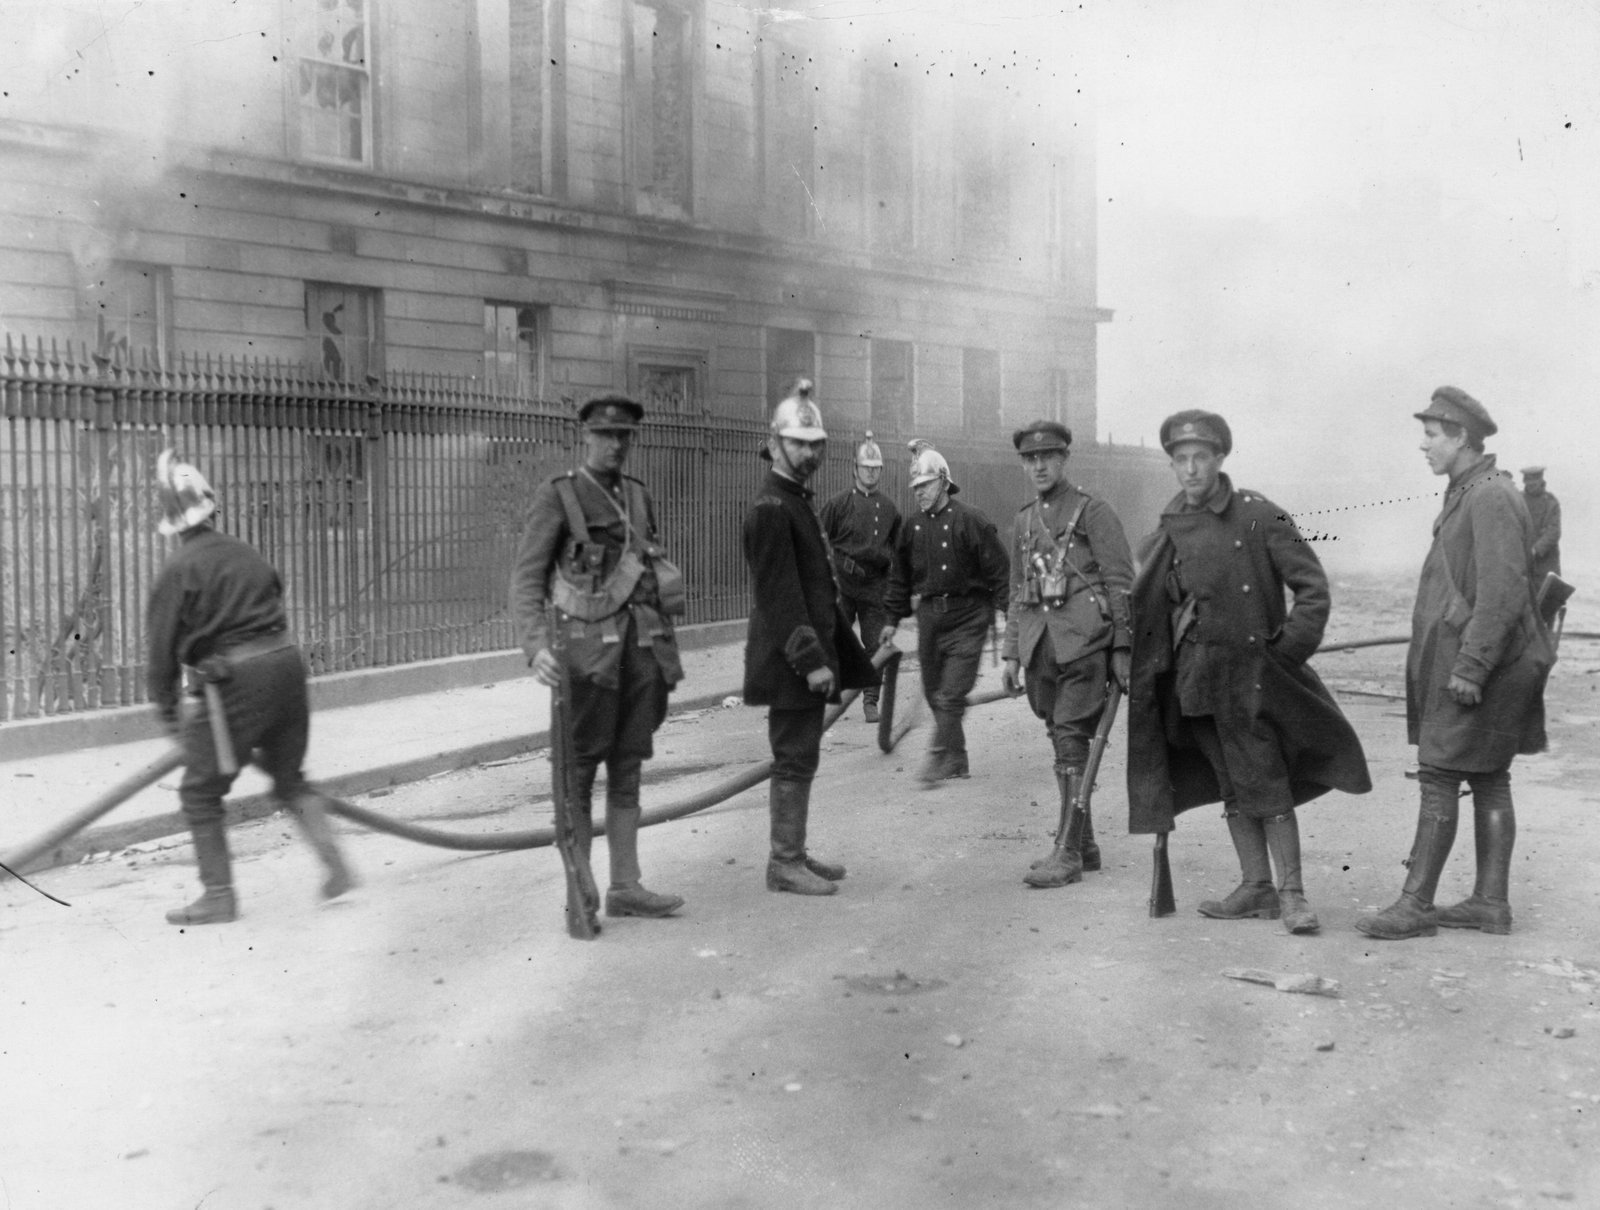 Image - Firemen on the scene of the Four Courts. The fire in the Public Records Office destroyed many priceless documents. Photo: Topical Press Agency/Getty Images